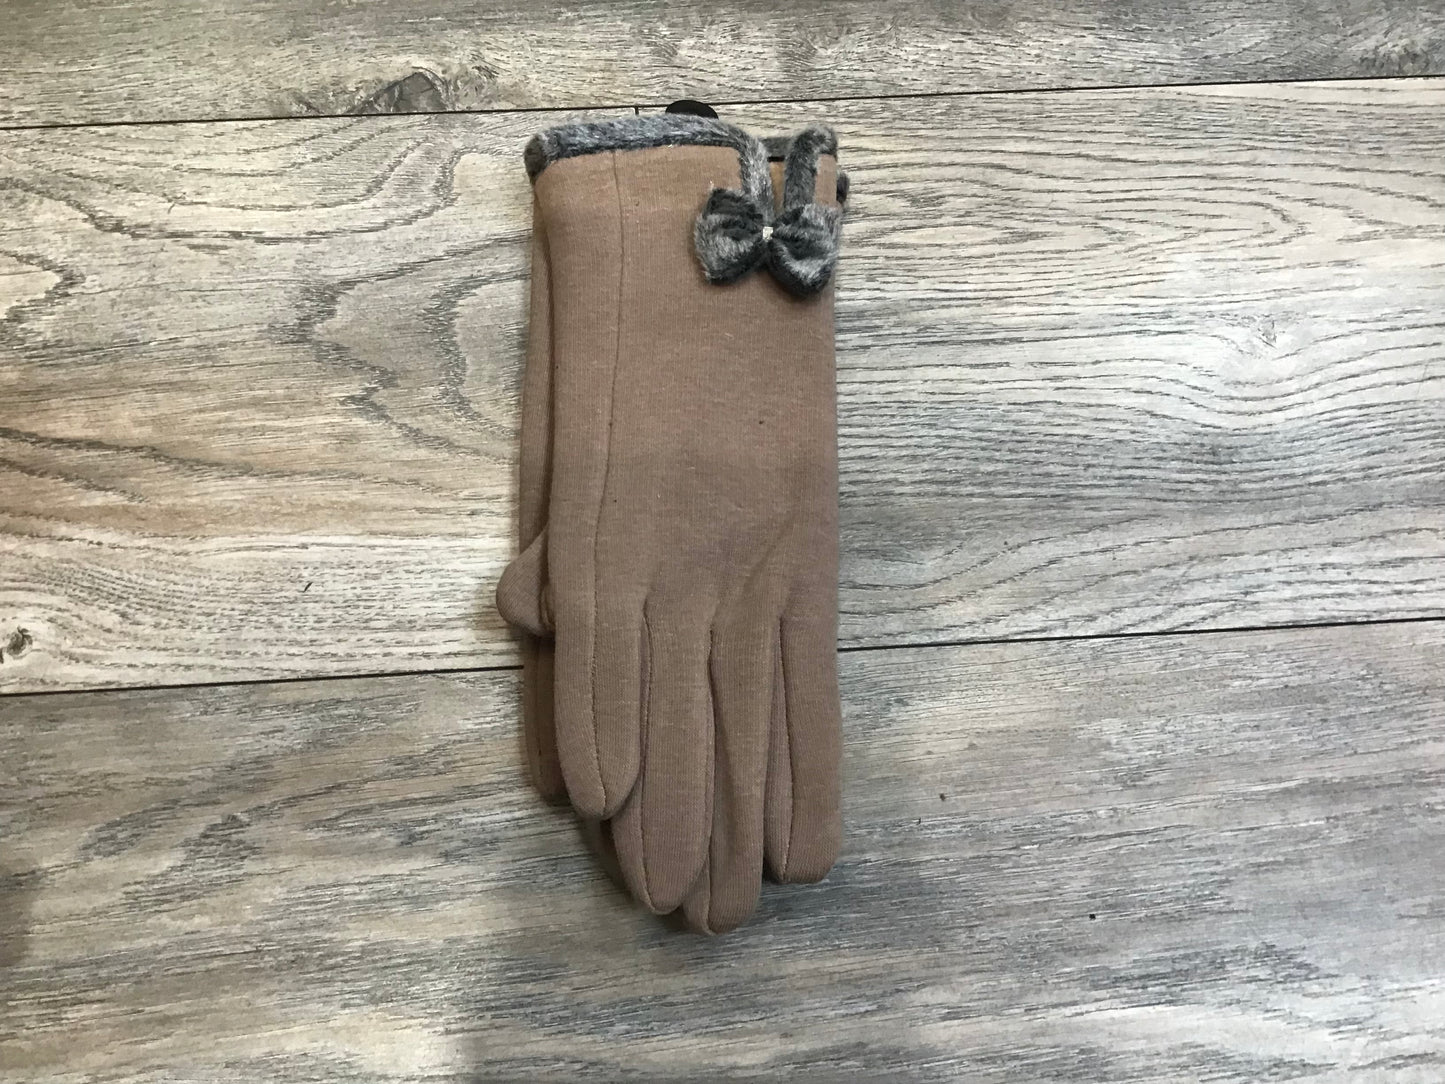 WOMEN’S TOUCH SCREEN BOW TIE GLOVES